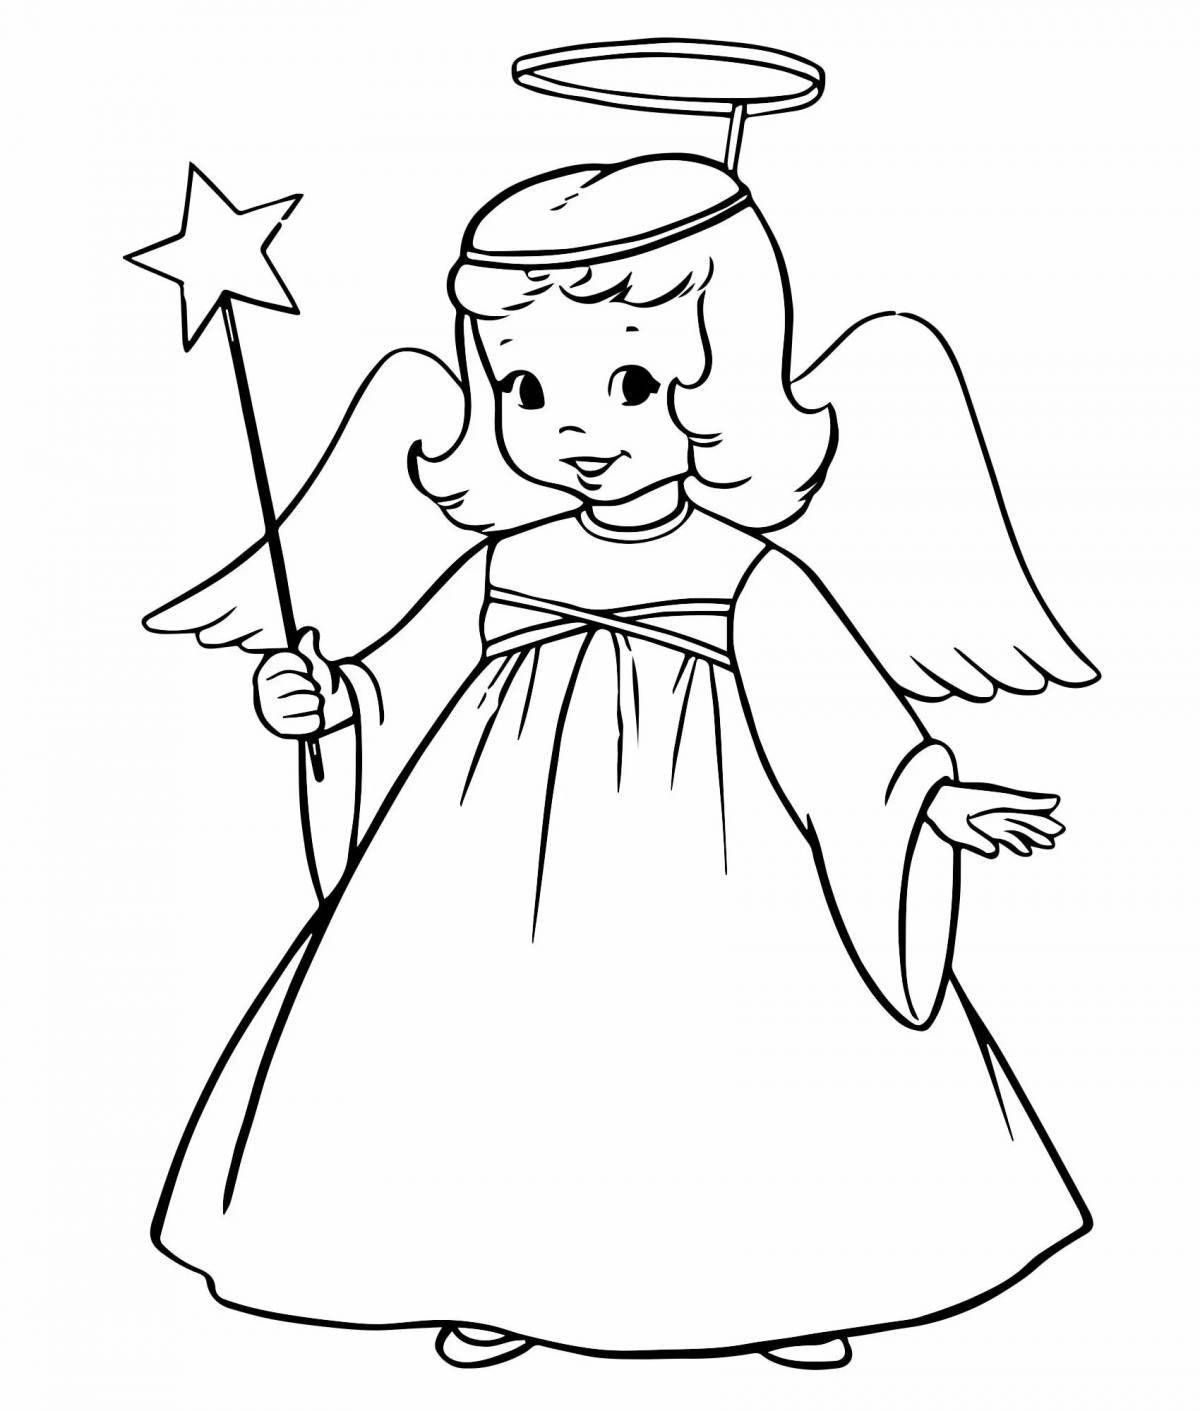 Elegant angel coloring book for 3-4 year olds